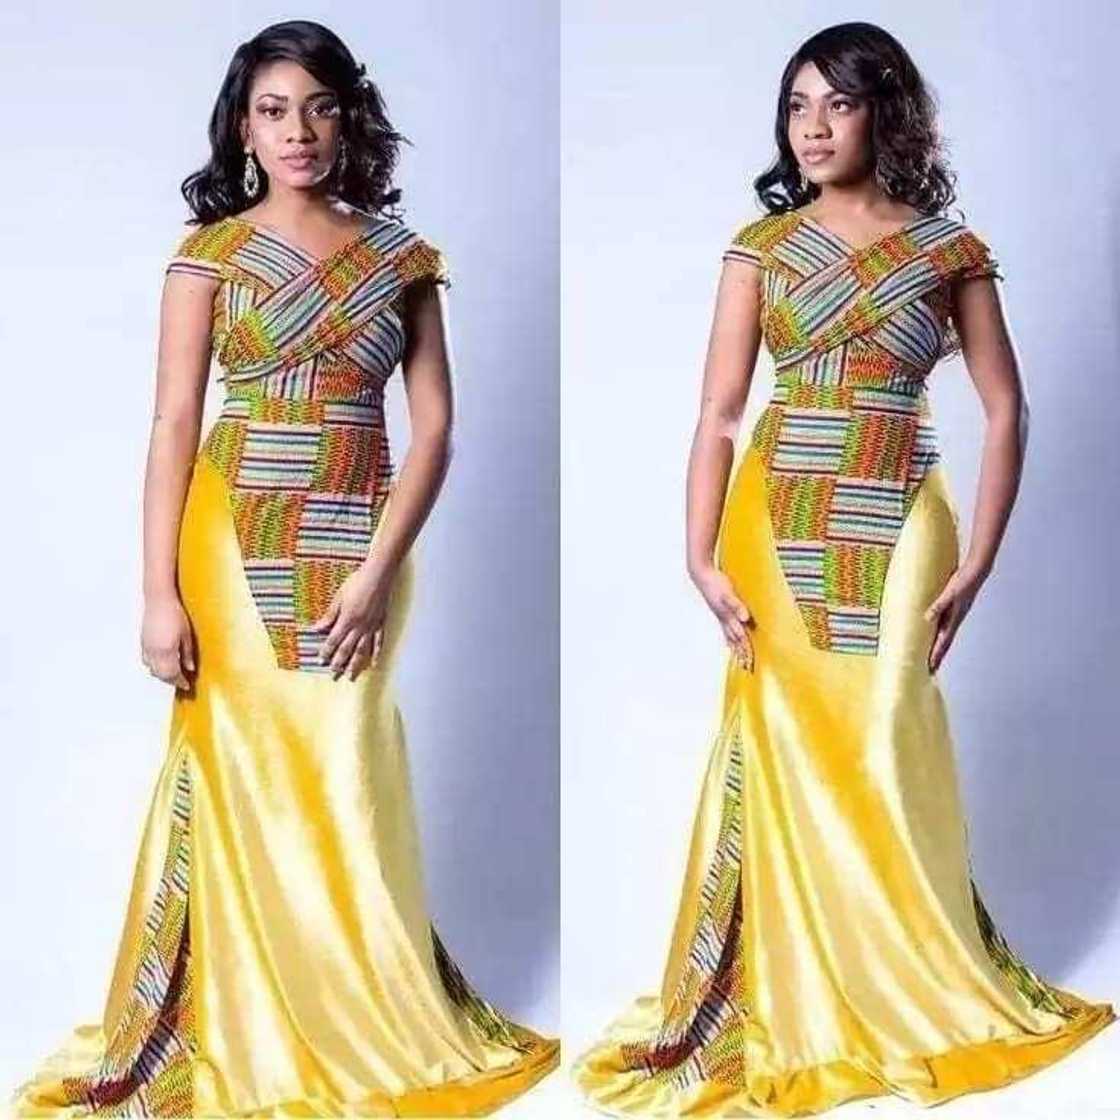 ghana traditional clothing styles
history of fashion
ghana fashion
ghanaian fashion designers